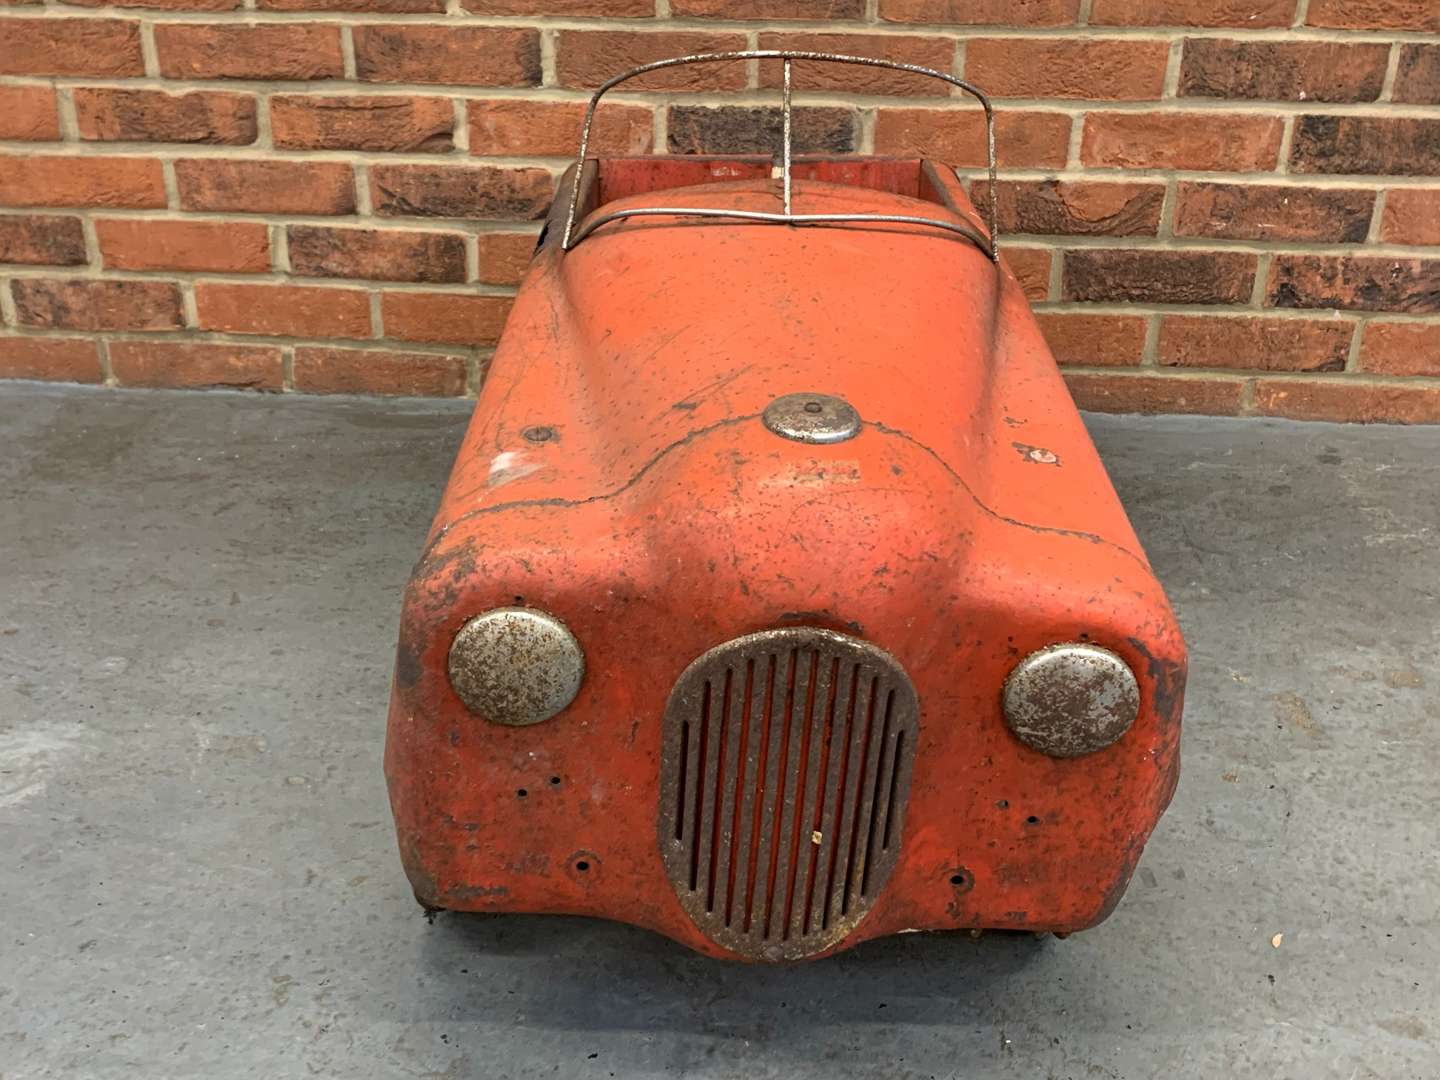 <p>Tri-ang Meteor Tin Plate Child's Pedal Car</p>